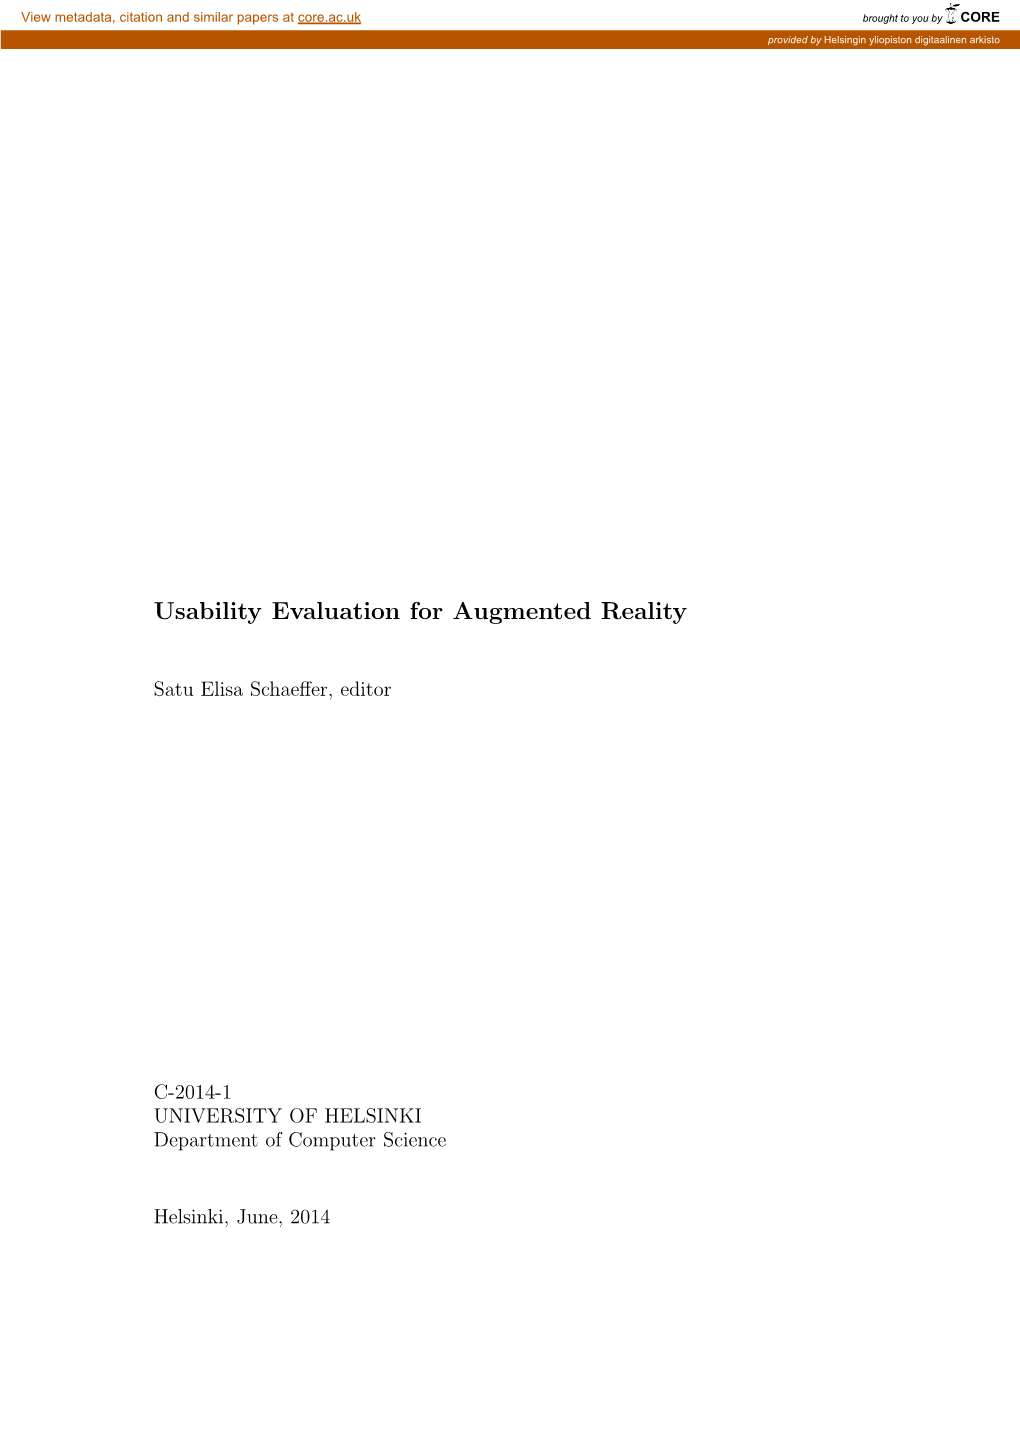 Usability Evaluation for Augmented Reality